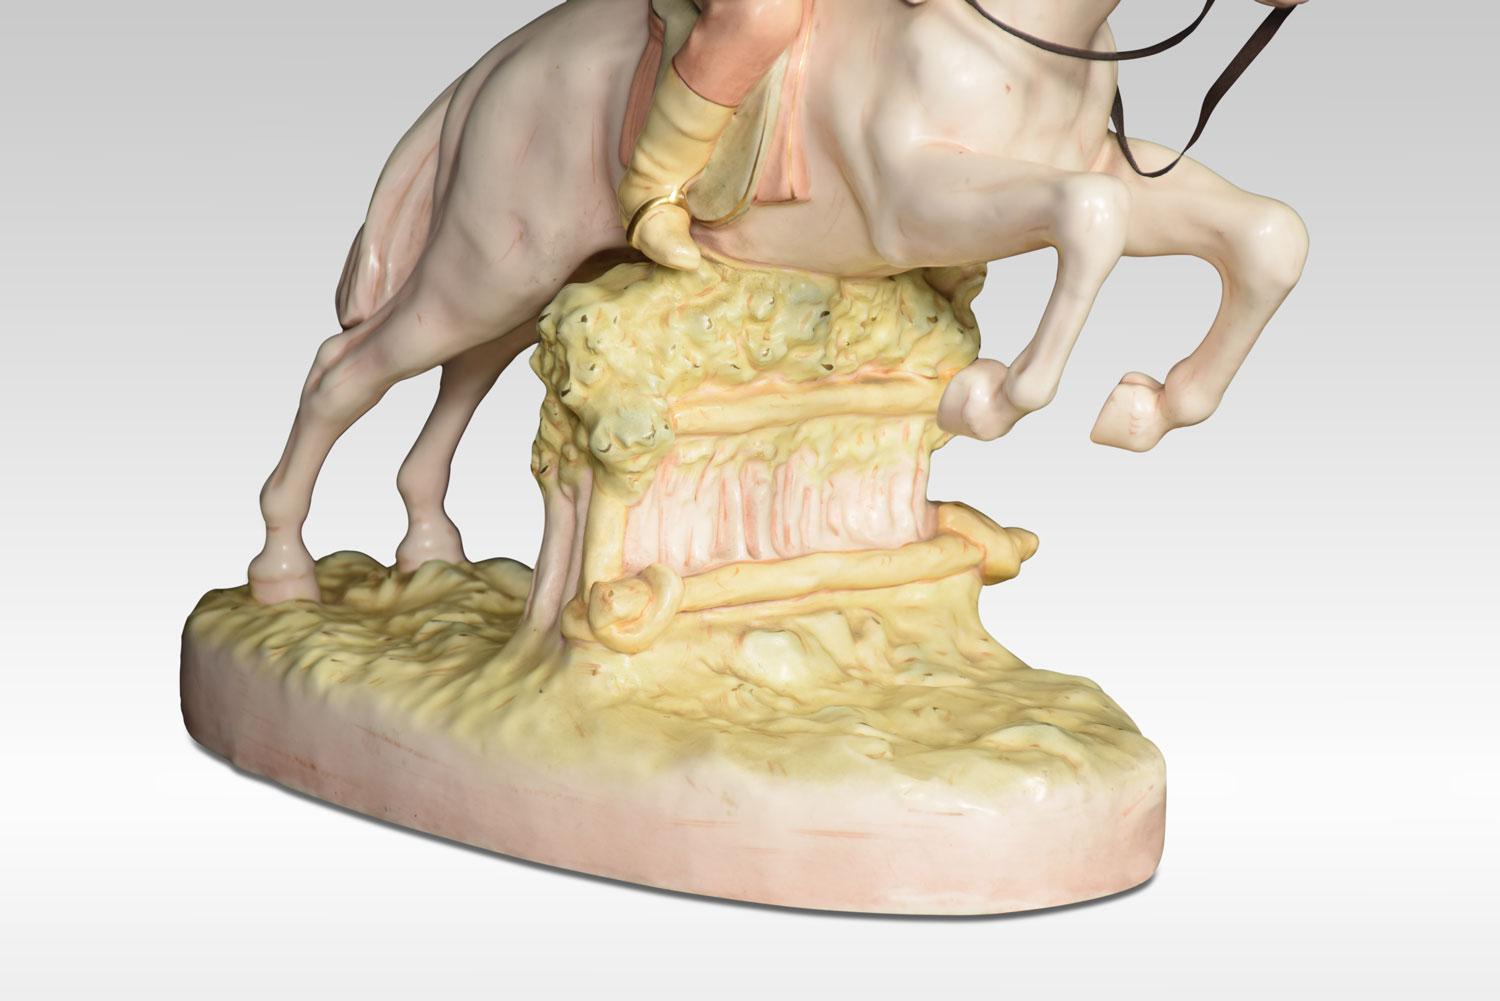 Royal Dux porcelain figure of a jumping race horse with Jockey.
Dimensions:
Height 15 inches
Width 18 inches
Depth 9 inches.